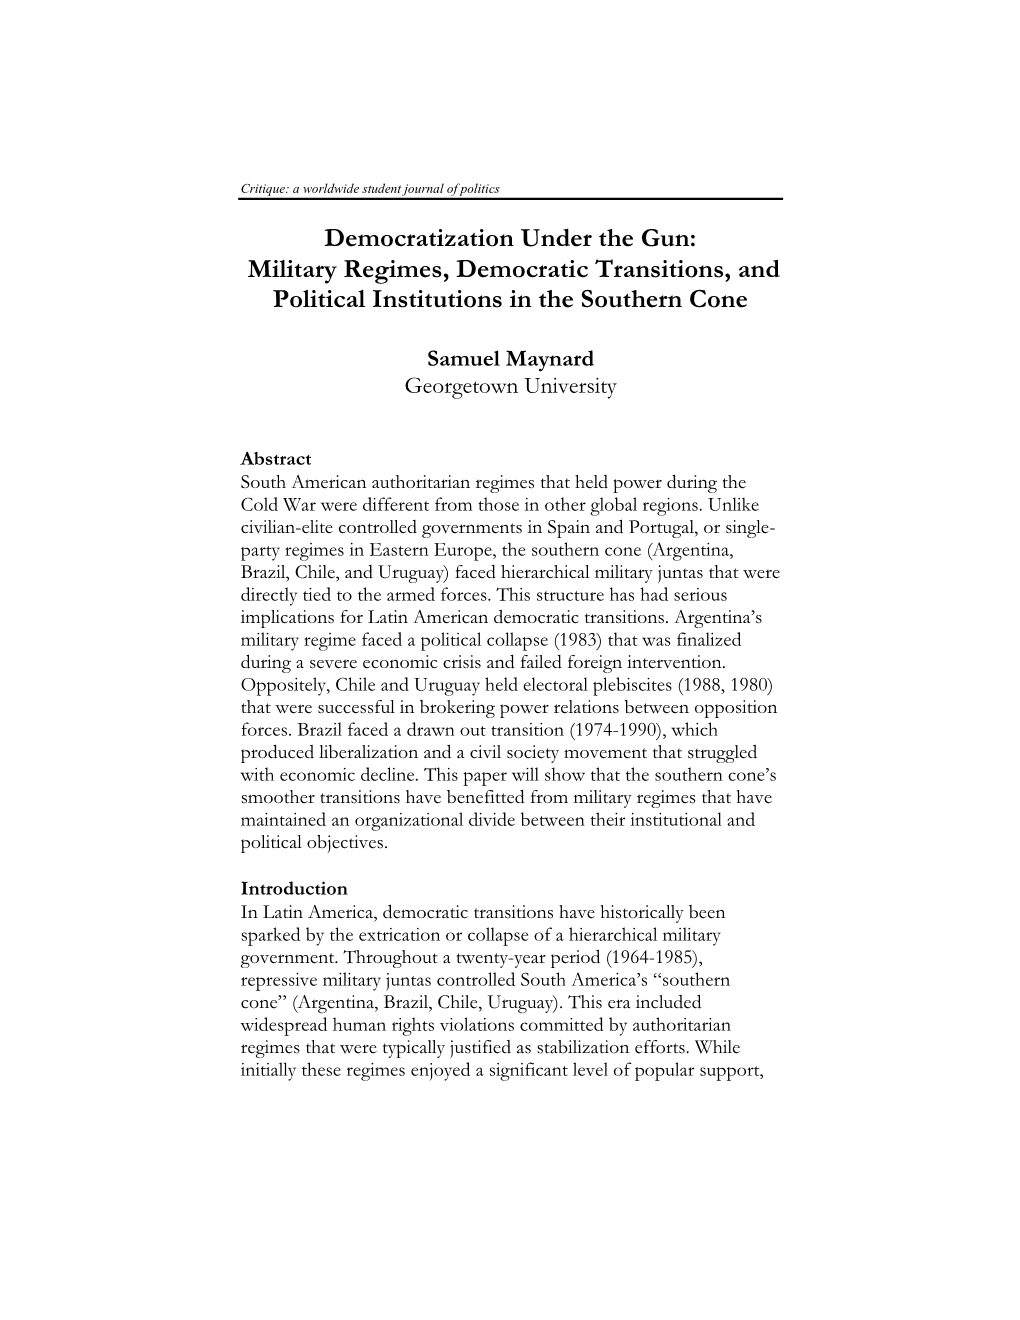 Democratization Under the Gun: Military Regimes, Democratic Transitions, and Political Institutions in the Southern Cone